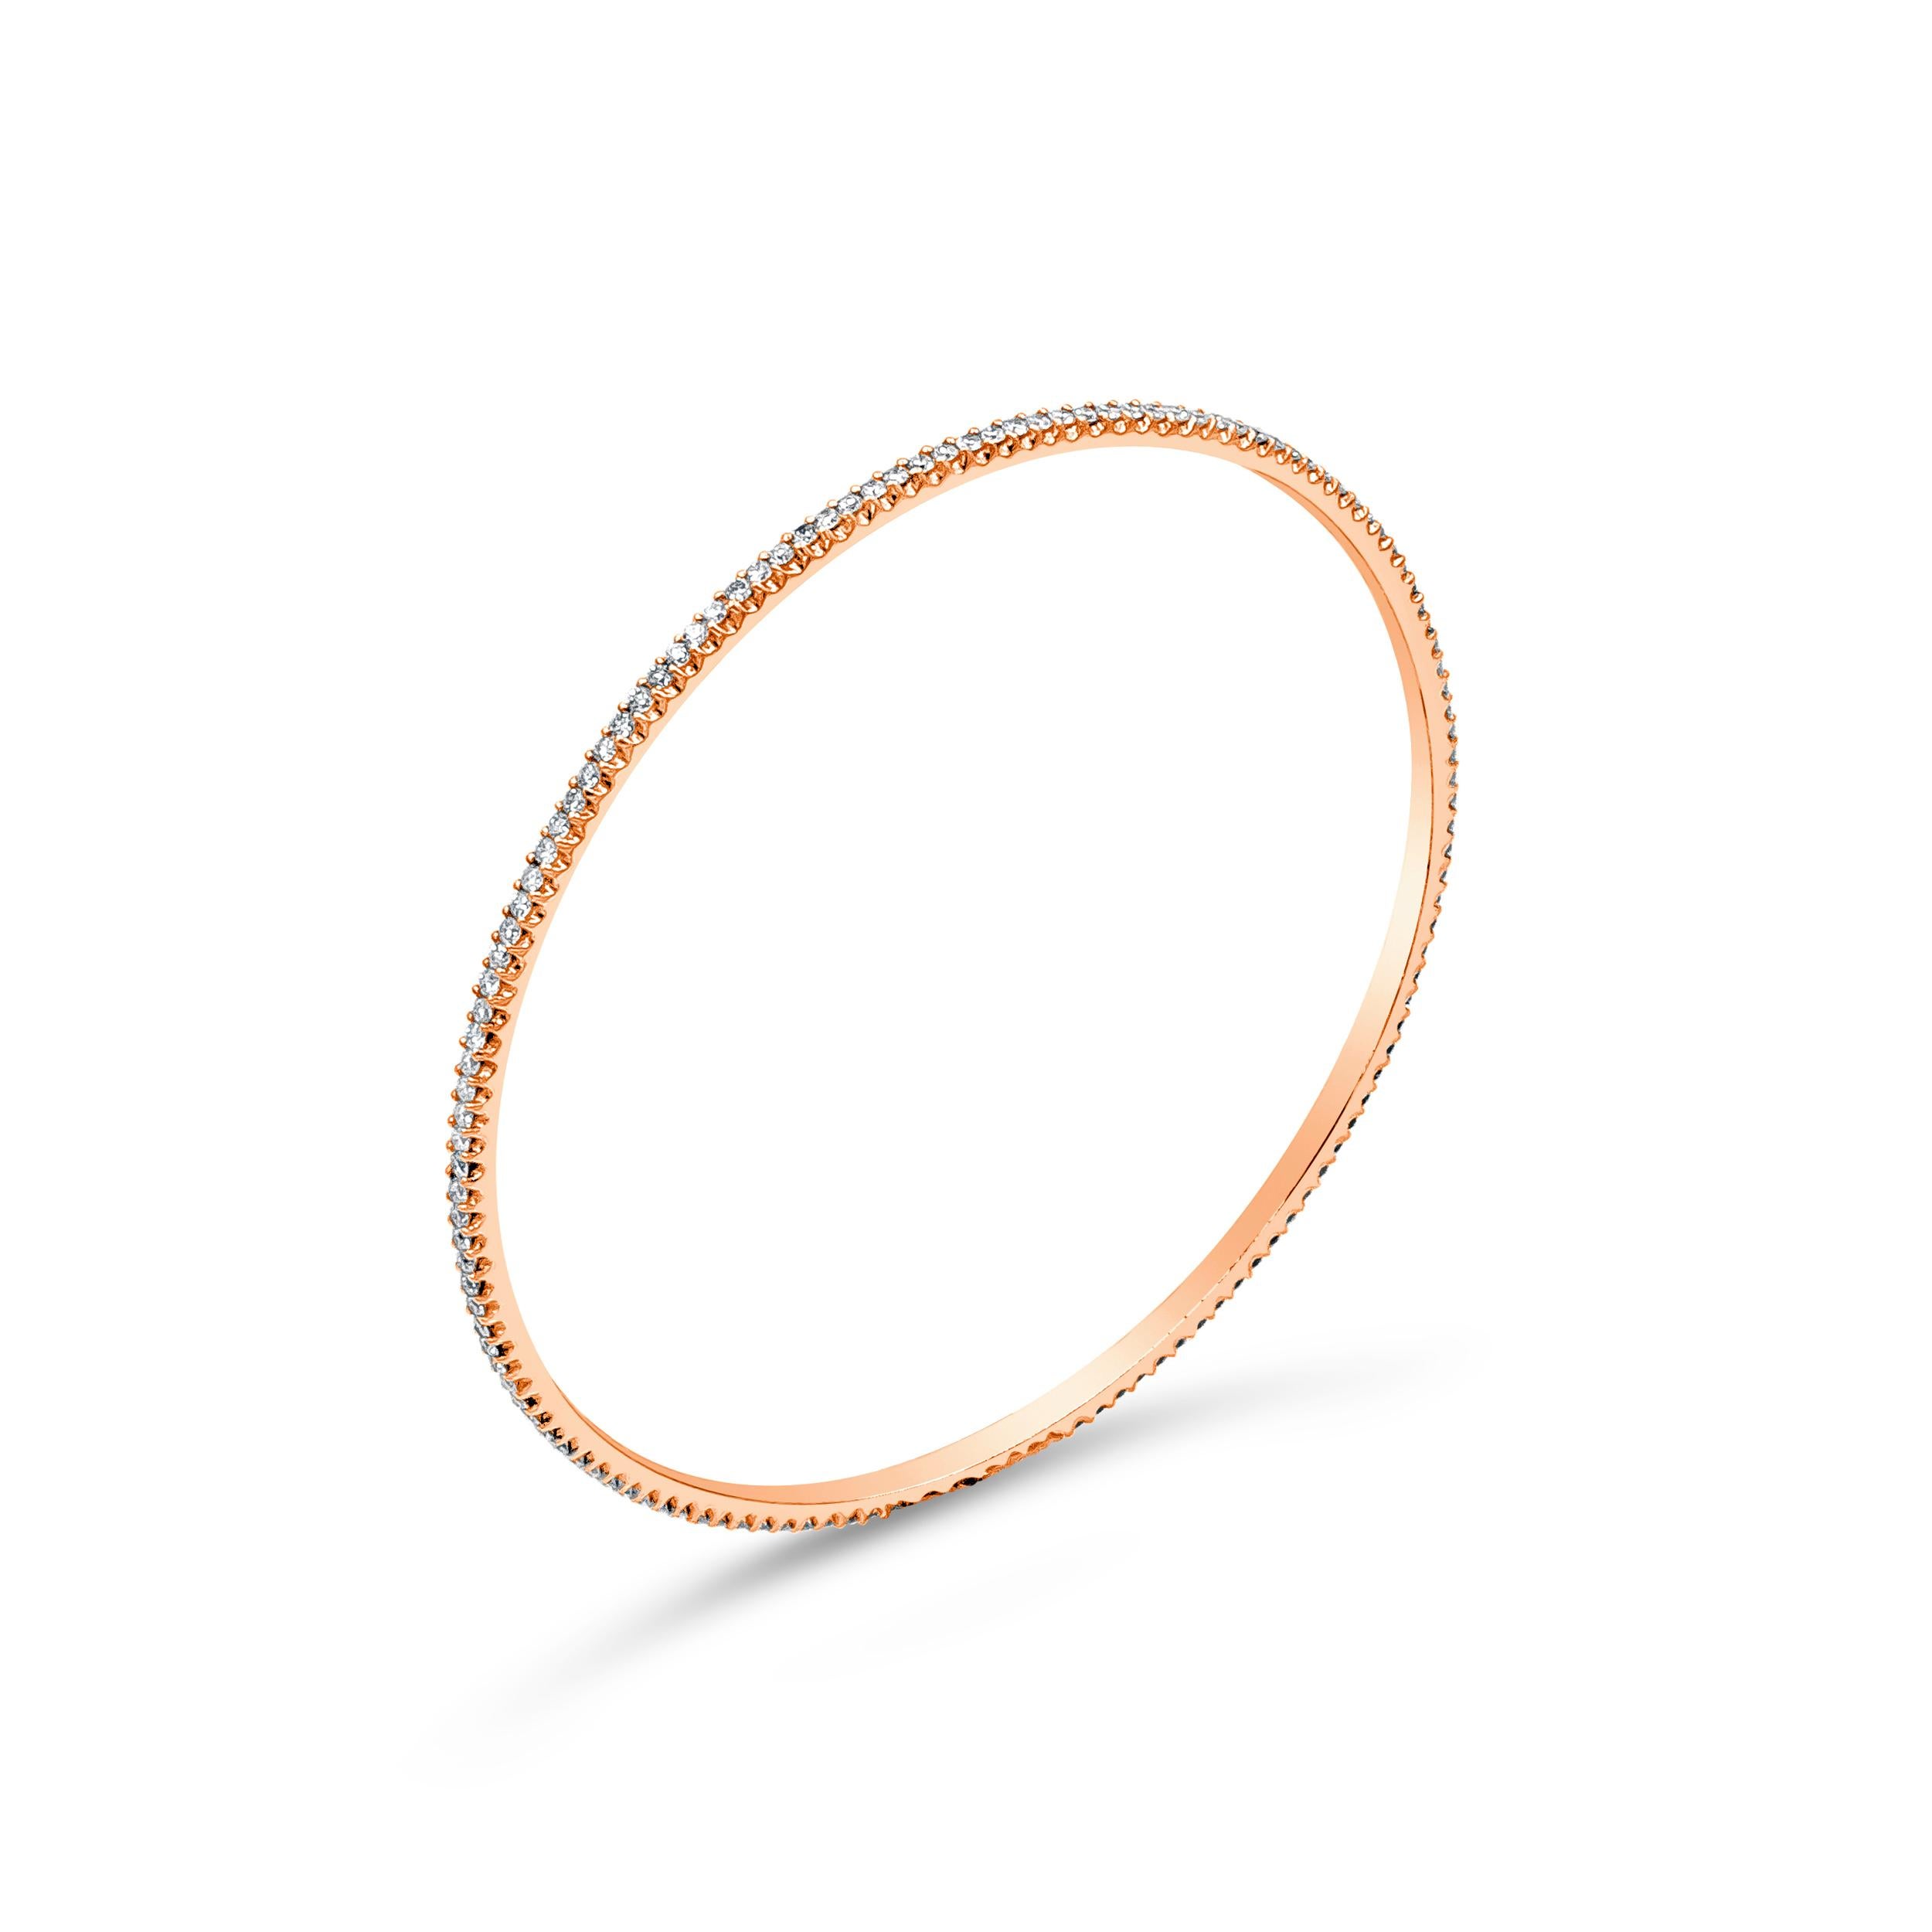 A classic bangle bracelet encrusted with round brilliant diamonds. Diamonds weigh 1.78 carats total. Made in 18 karat rose gold. 

